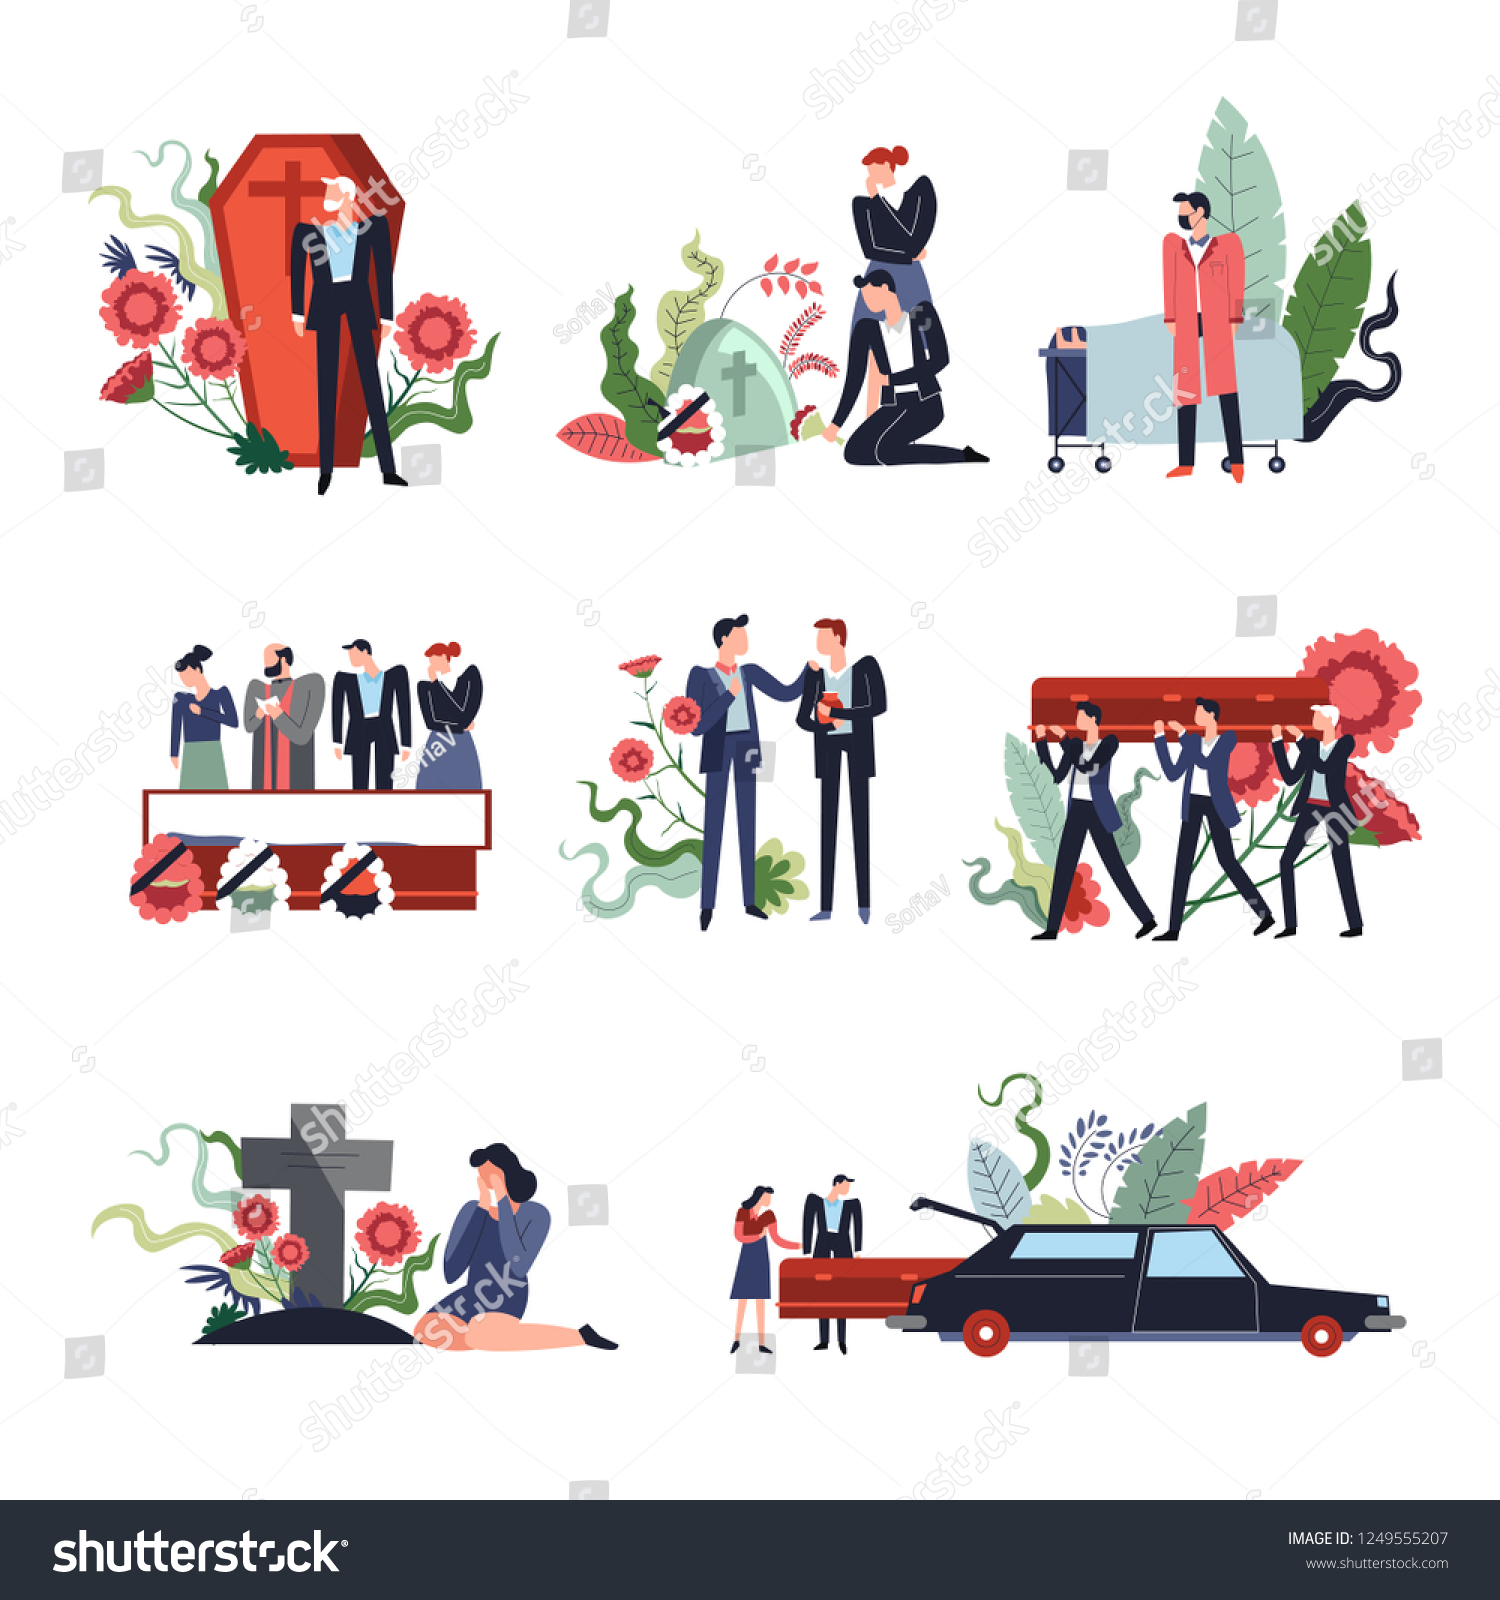 Funeral Ceremony People Sad Grieving Deceased Stock Vector Royalty Free